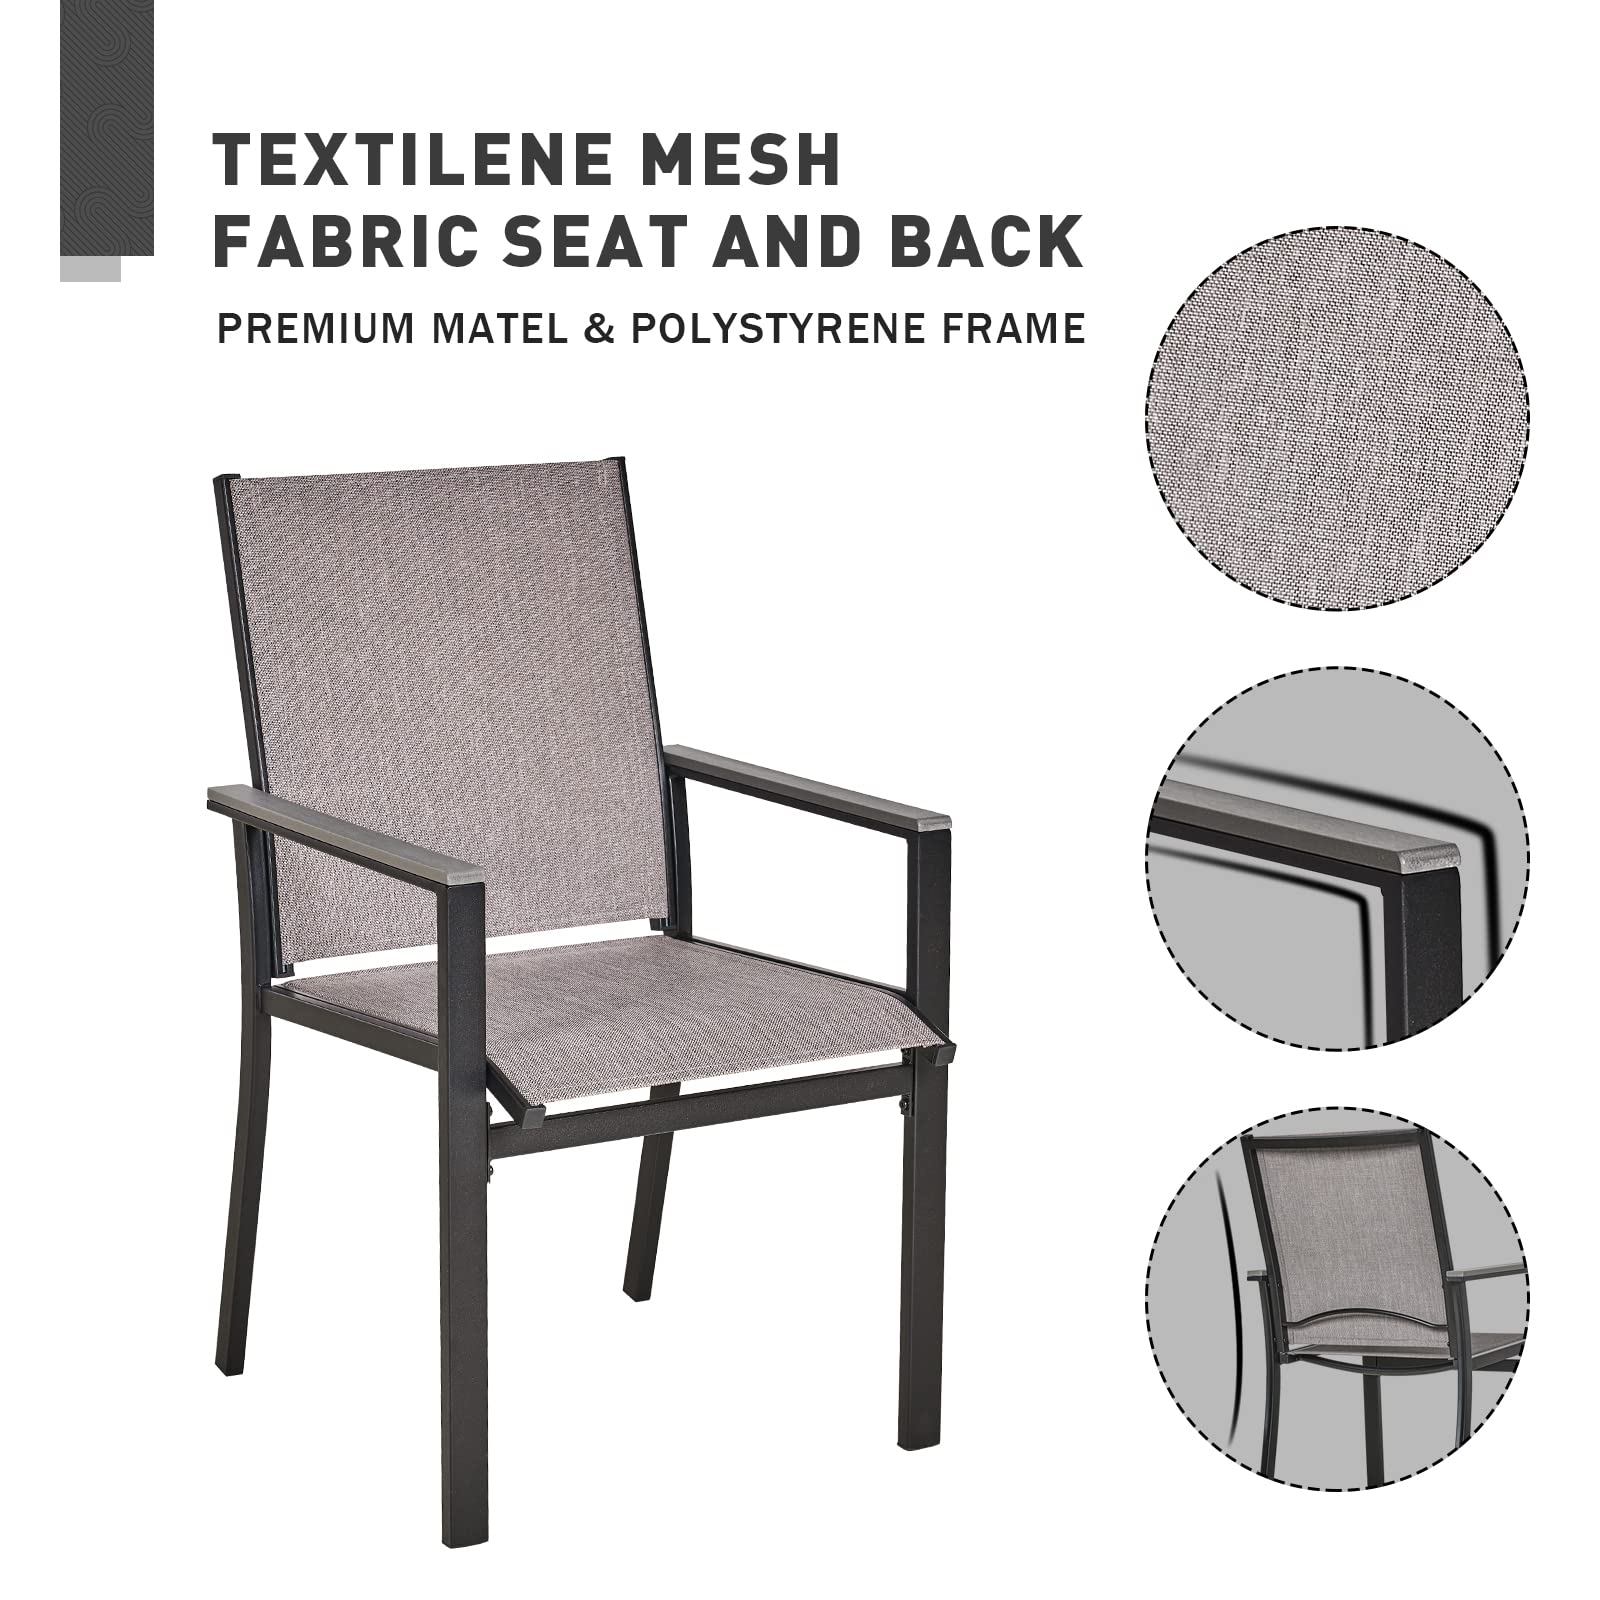 MEOOEM Patio Chair Set of 2, Textilene Patio Furniture Chair with Armrest & Black Metal Frame for Lawn Garden Backyard.